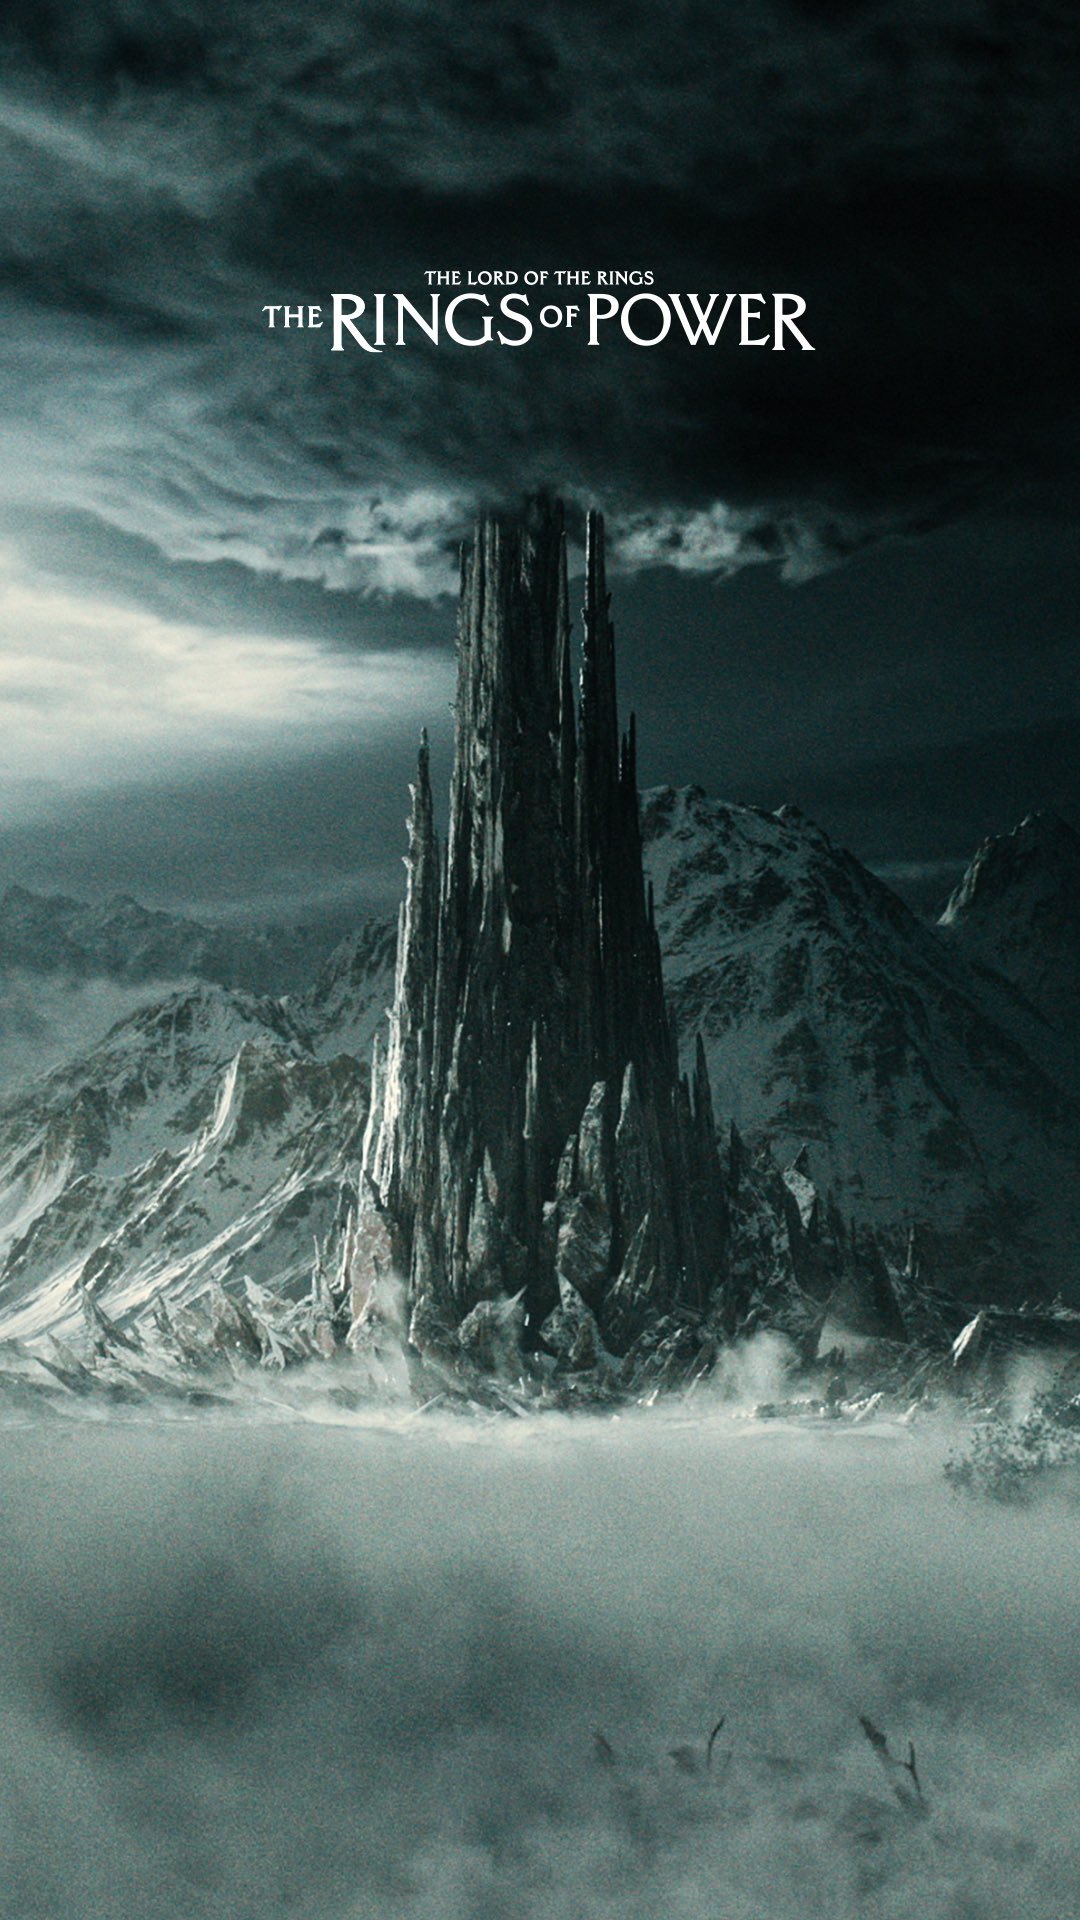 The lord of the rings the rings of power season 2 locations 1